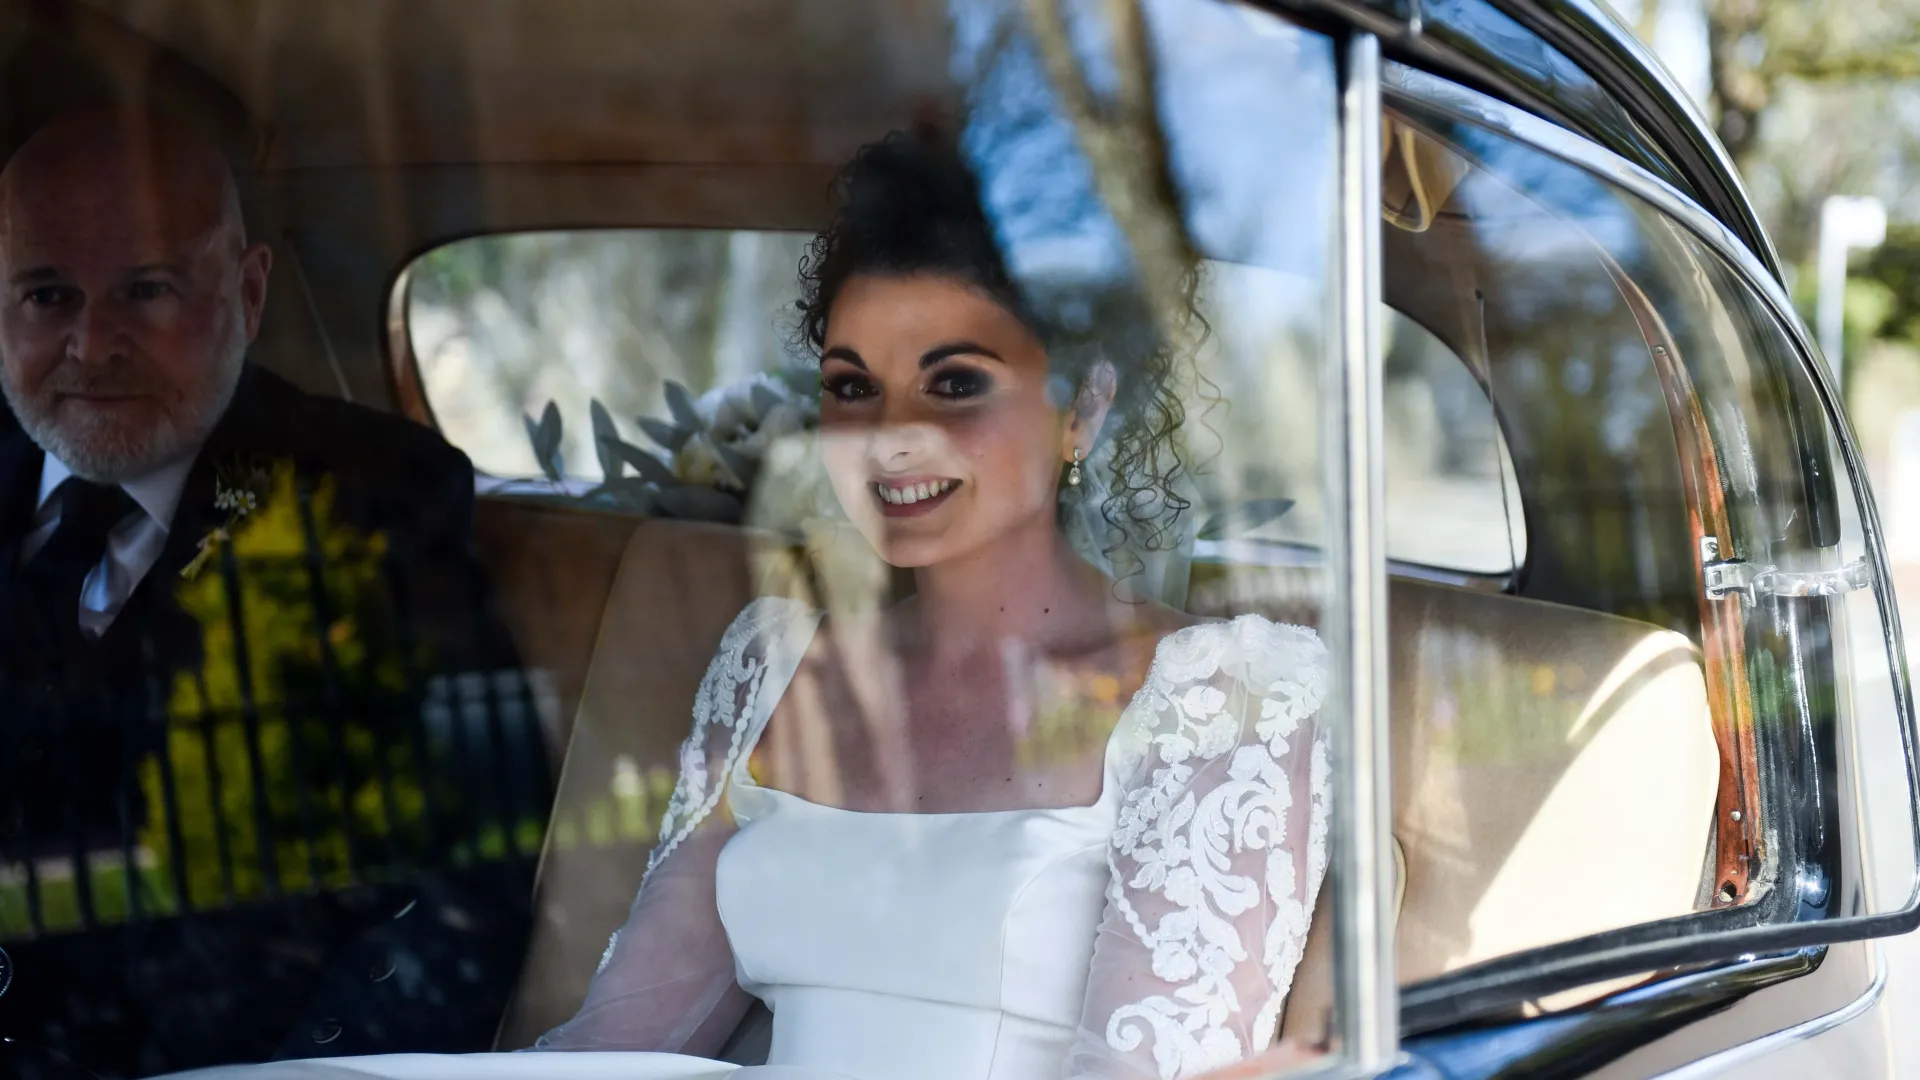 Bride and Father travelling in the back of the Classic Rolls-Royce. Bride looking at the photographer through the window.